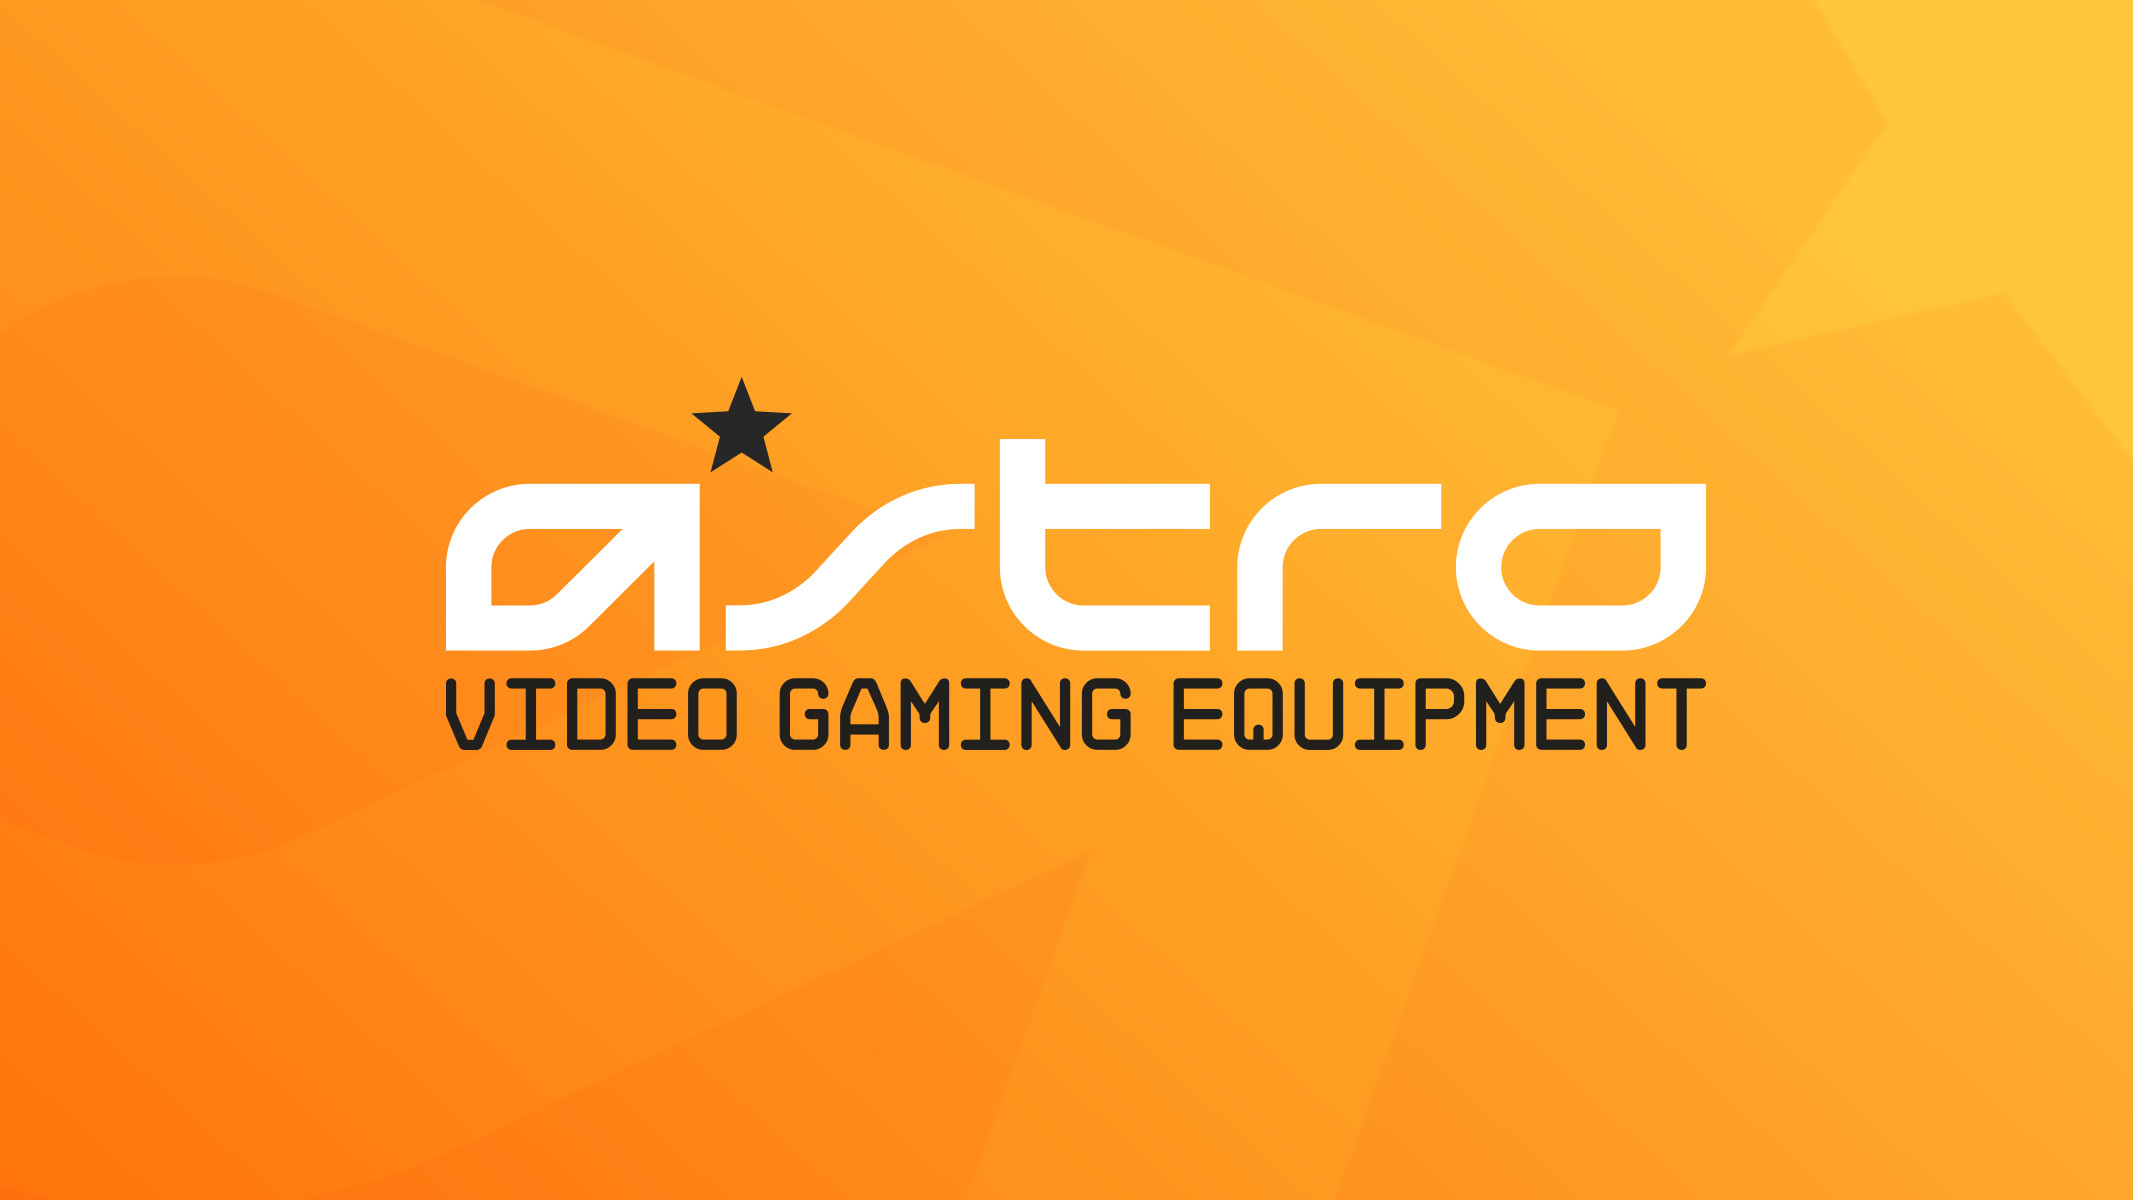 2133x1200 Astro Gaming Wallpaper - http://wallpaperzoo.com/astro-gaming-